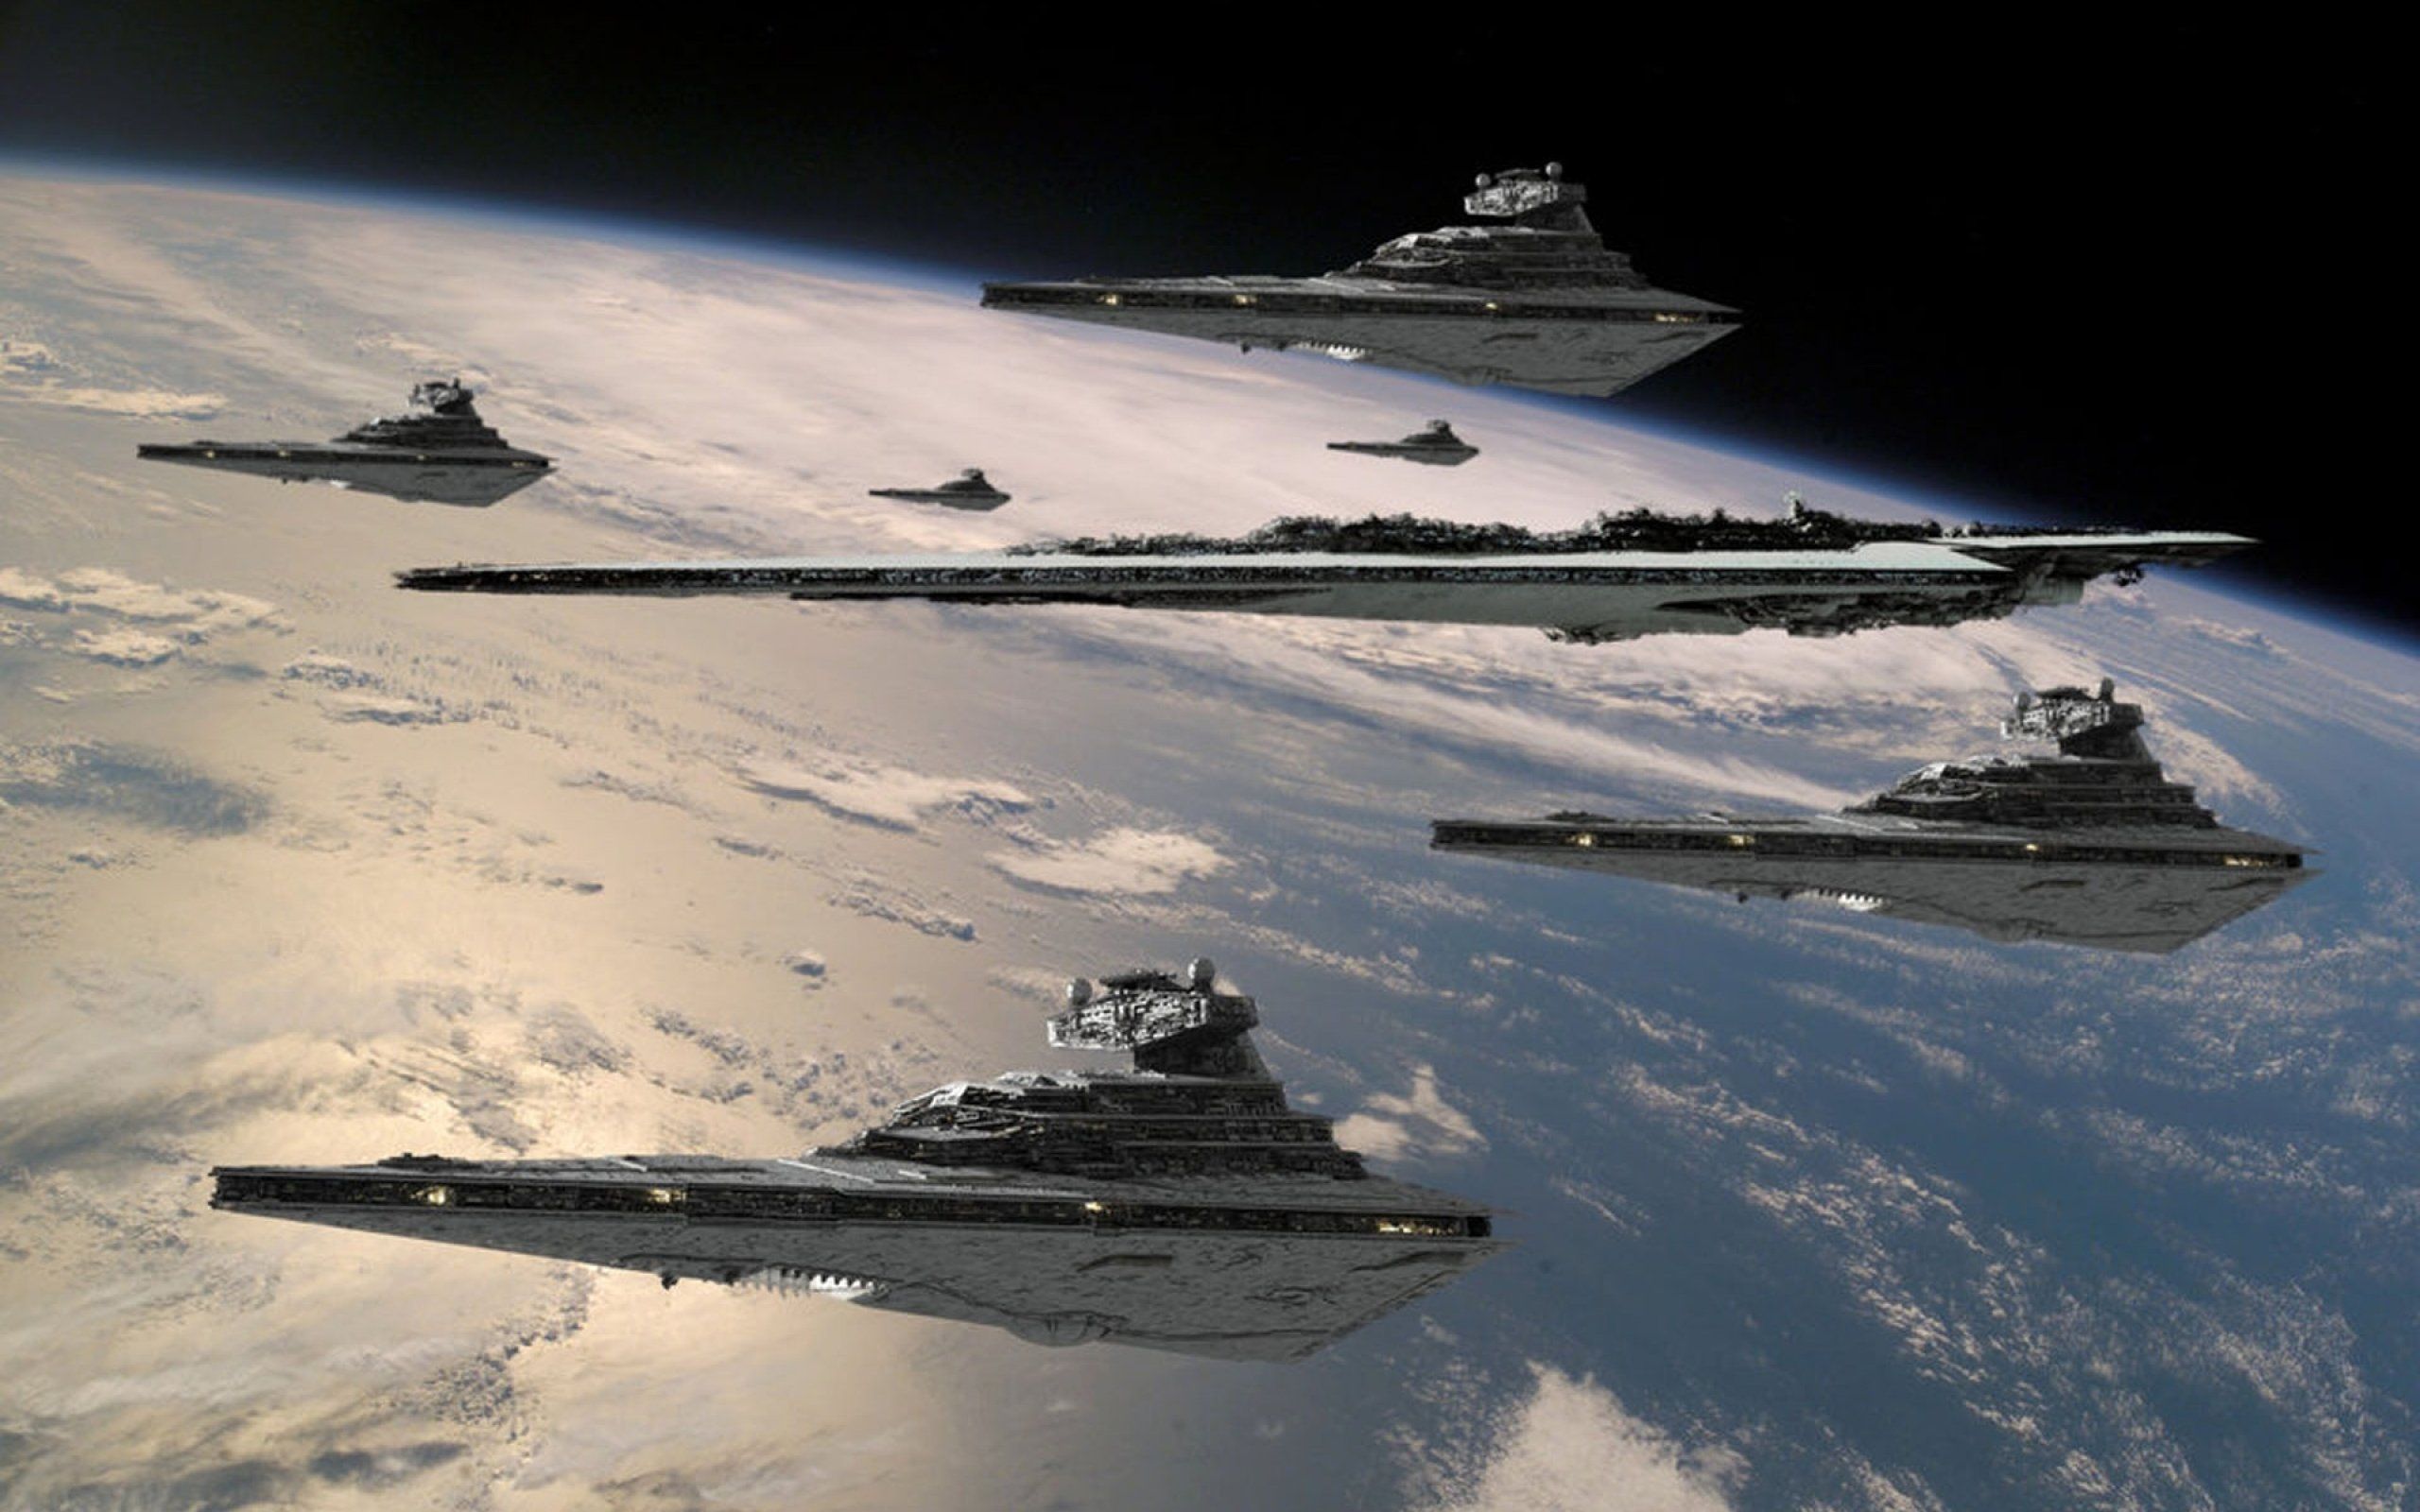 Imperial Star Destroyer Fleet with The Executor. Star wars ships